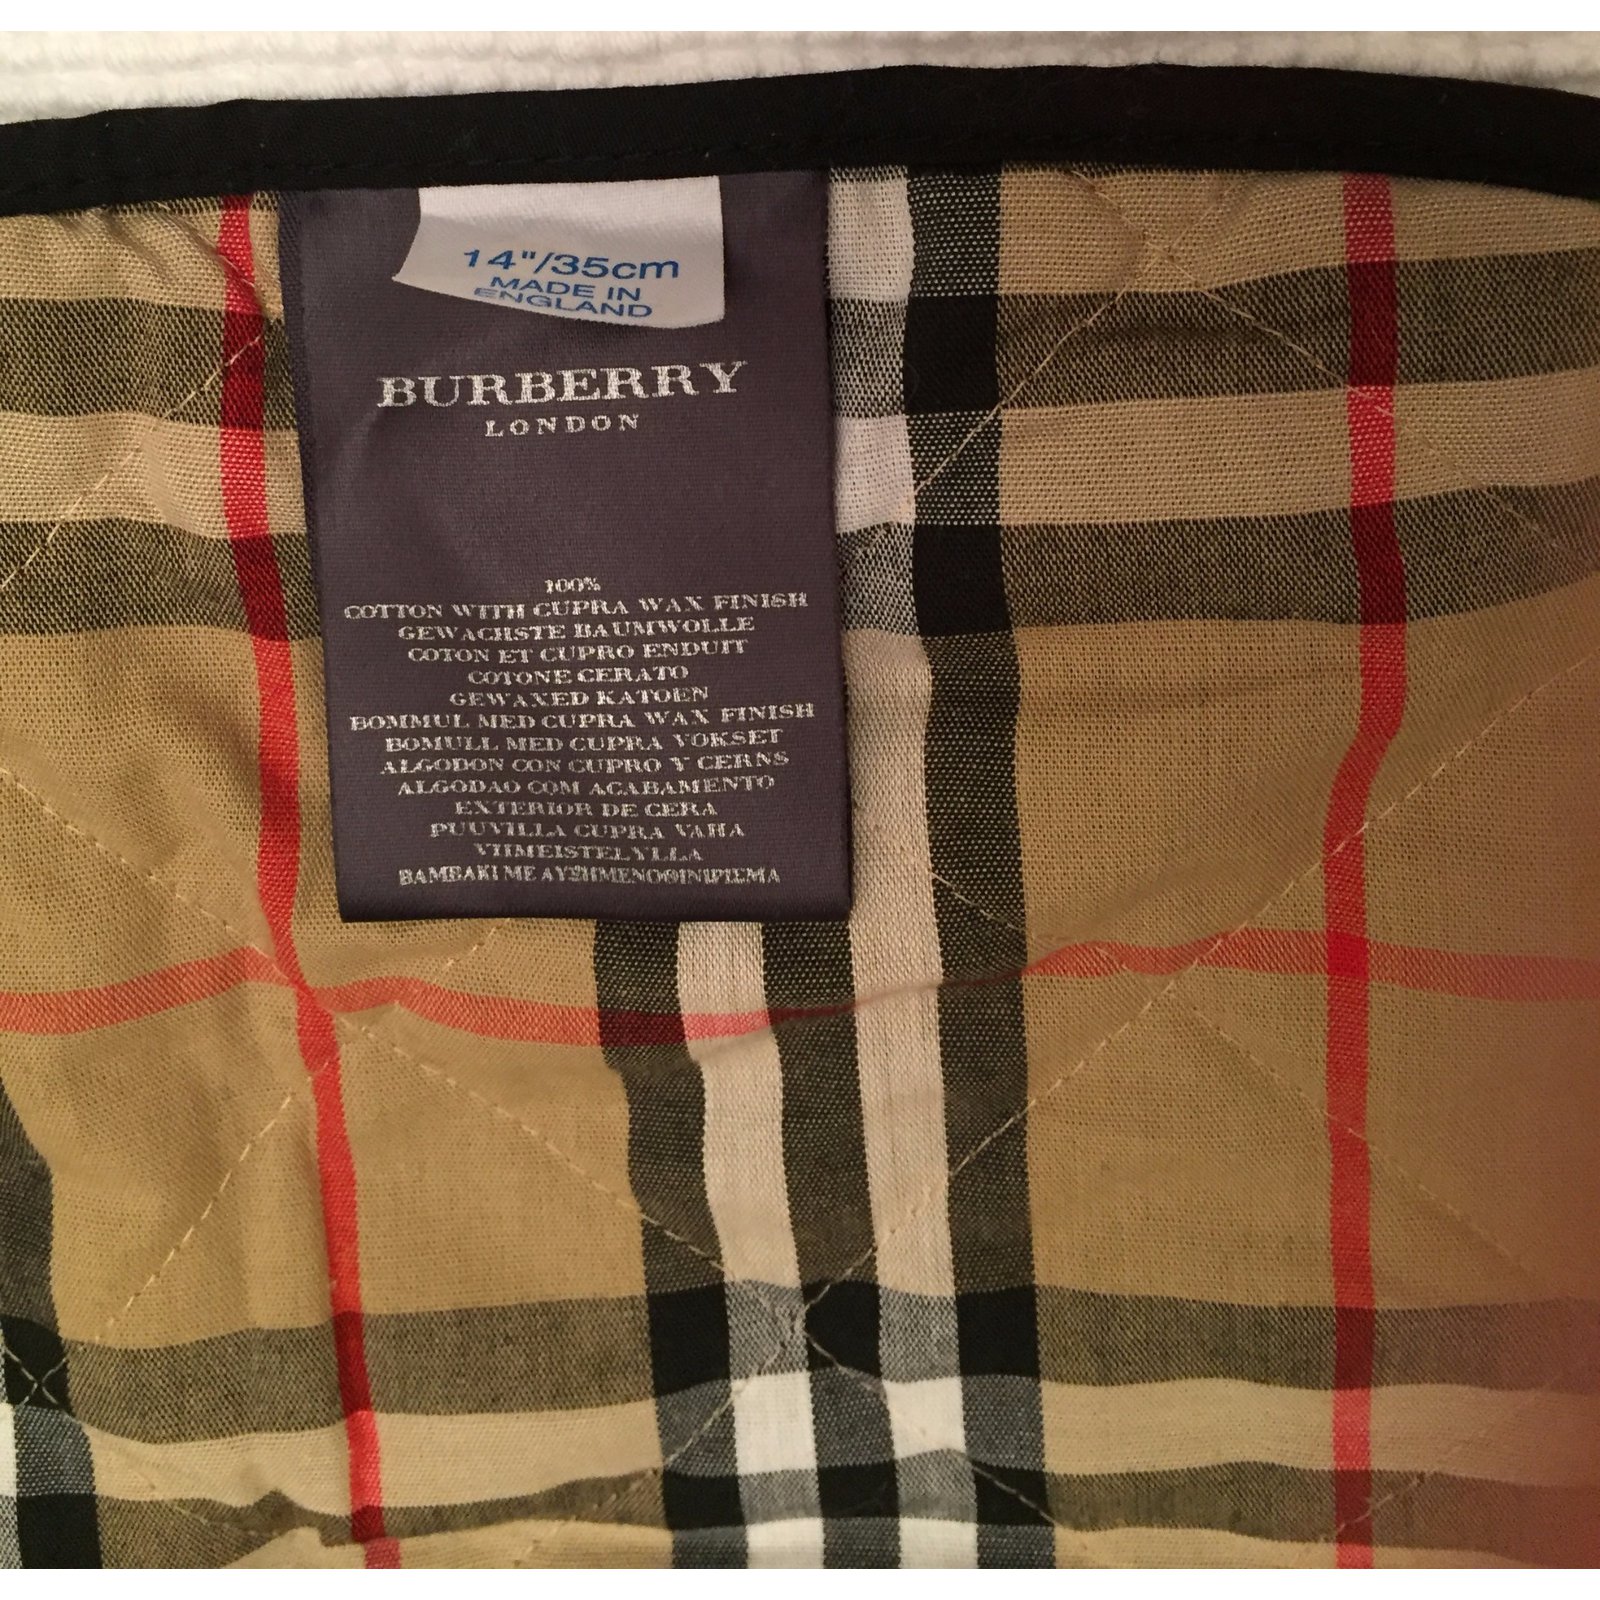 burberry dog trench coat